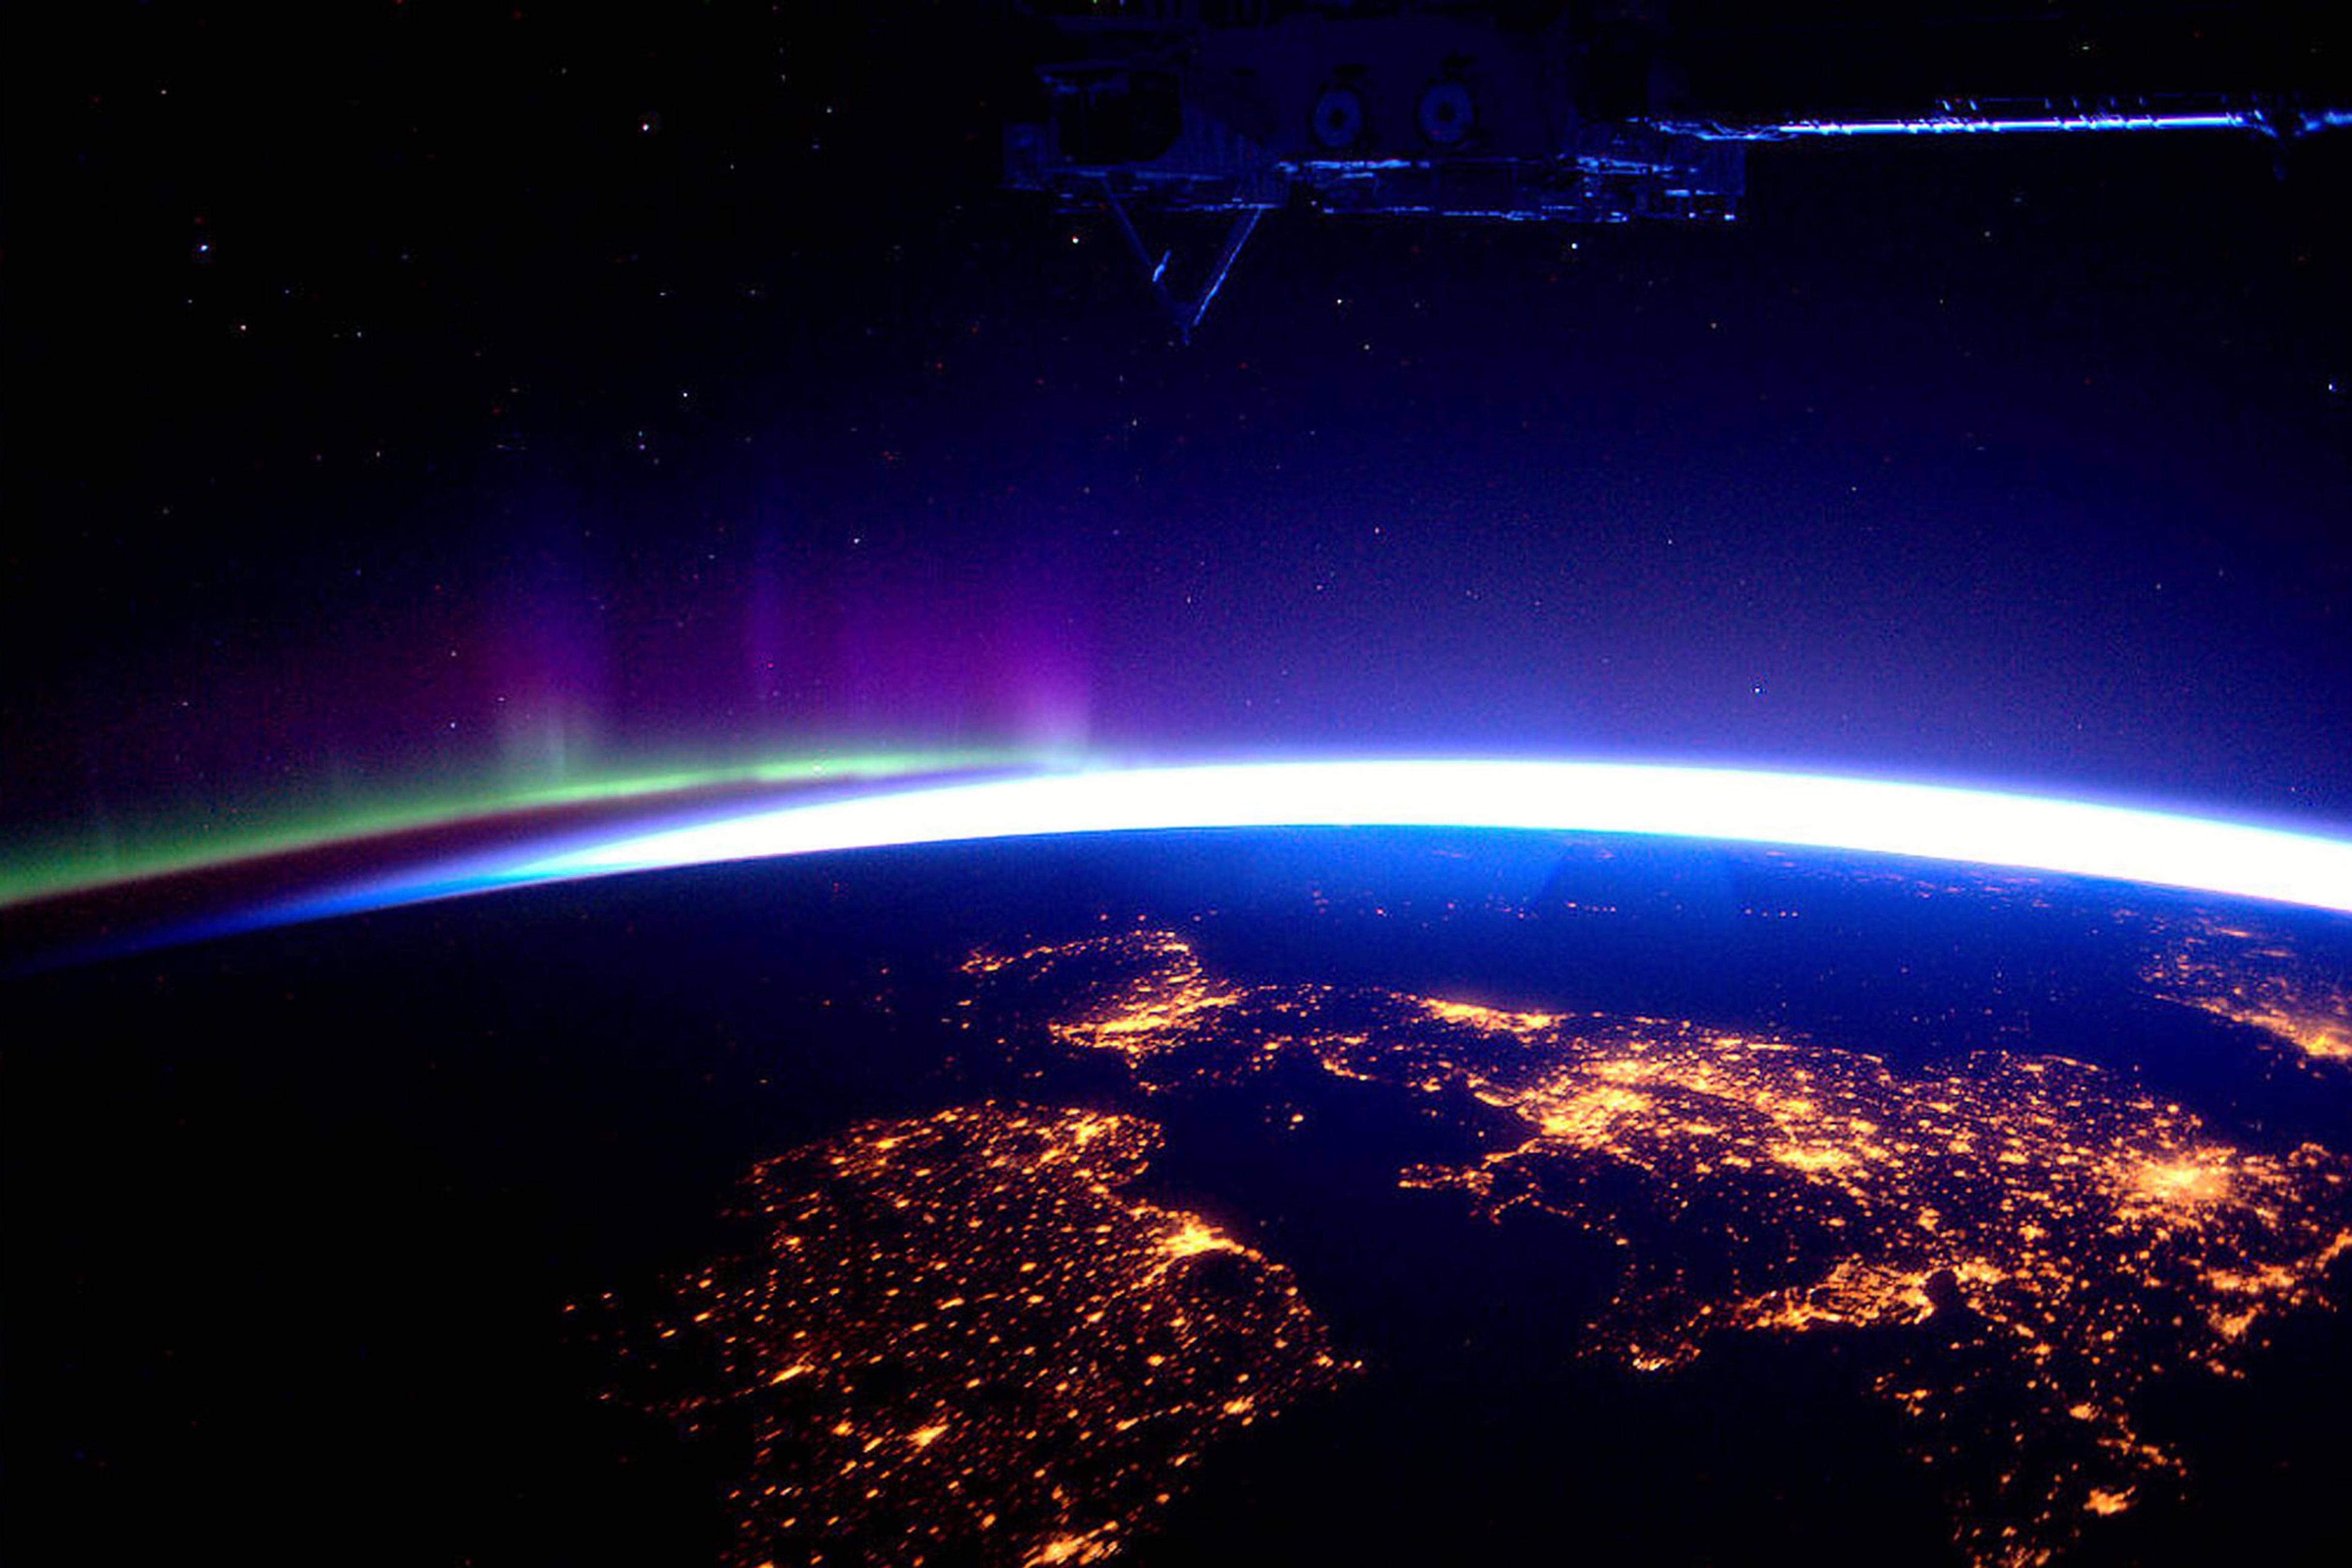 Photo: The UK At Night From the International Space Station